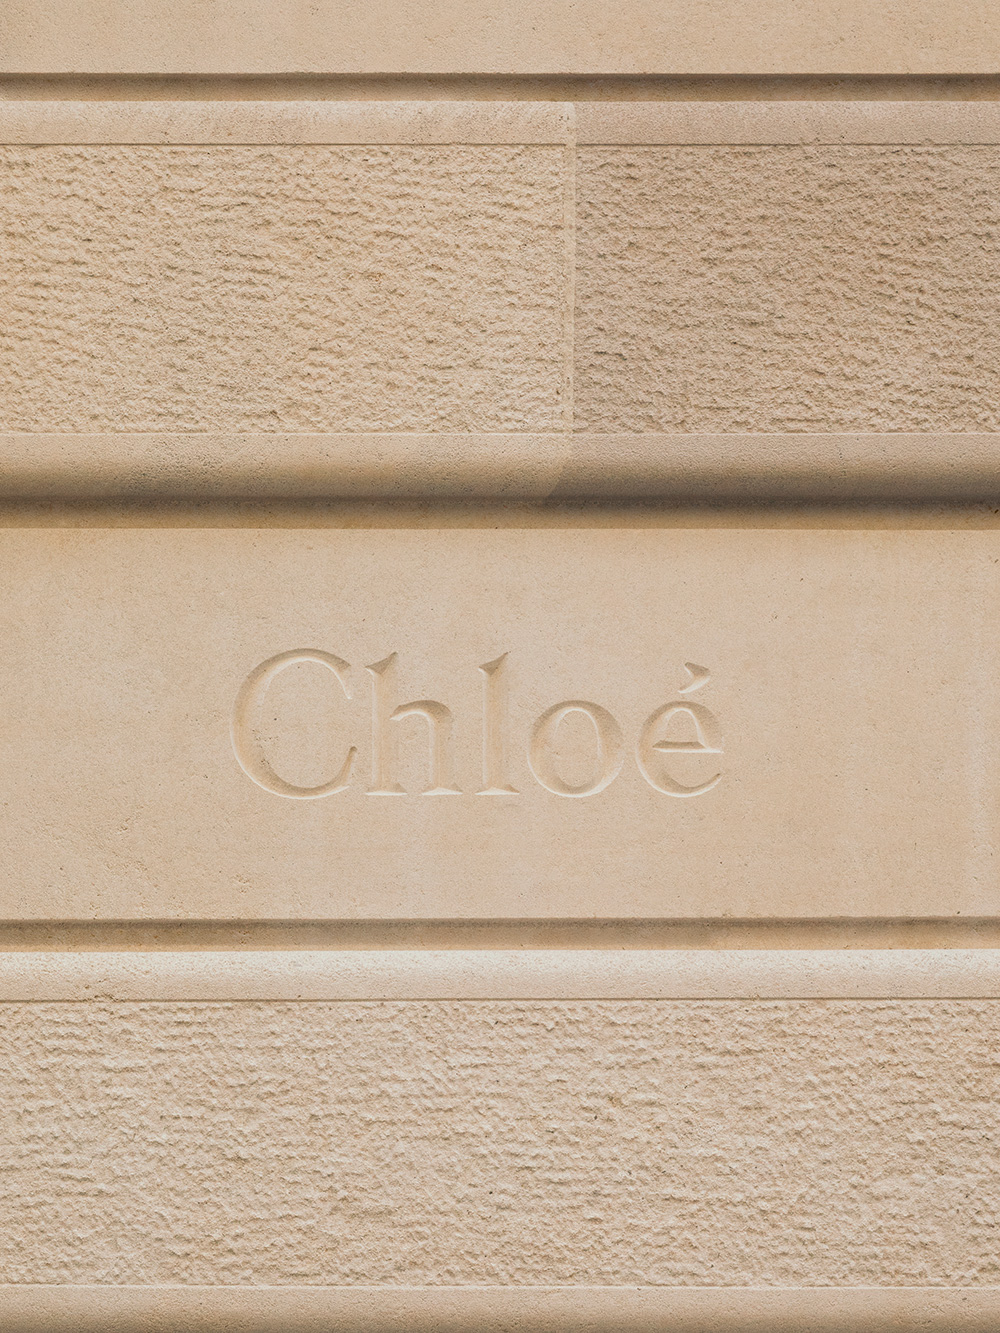 Maison Chloé: the French fashion brand history - Chloé Official